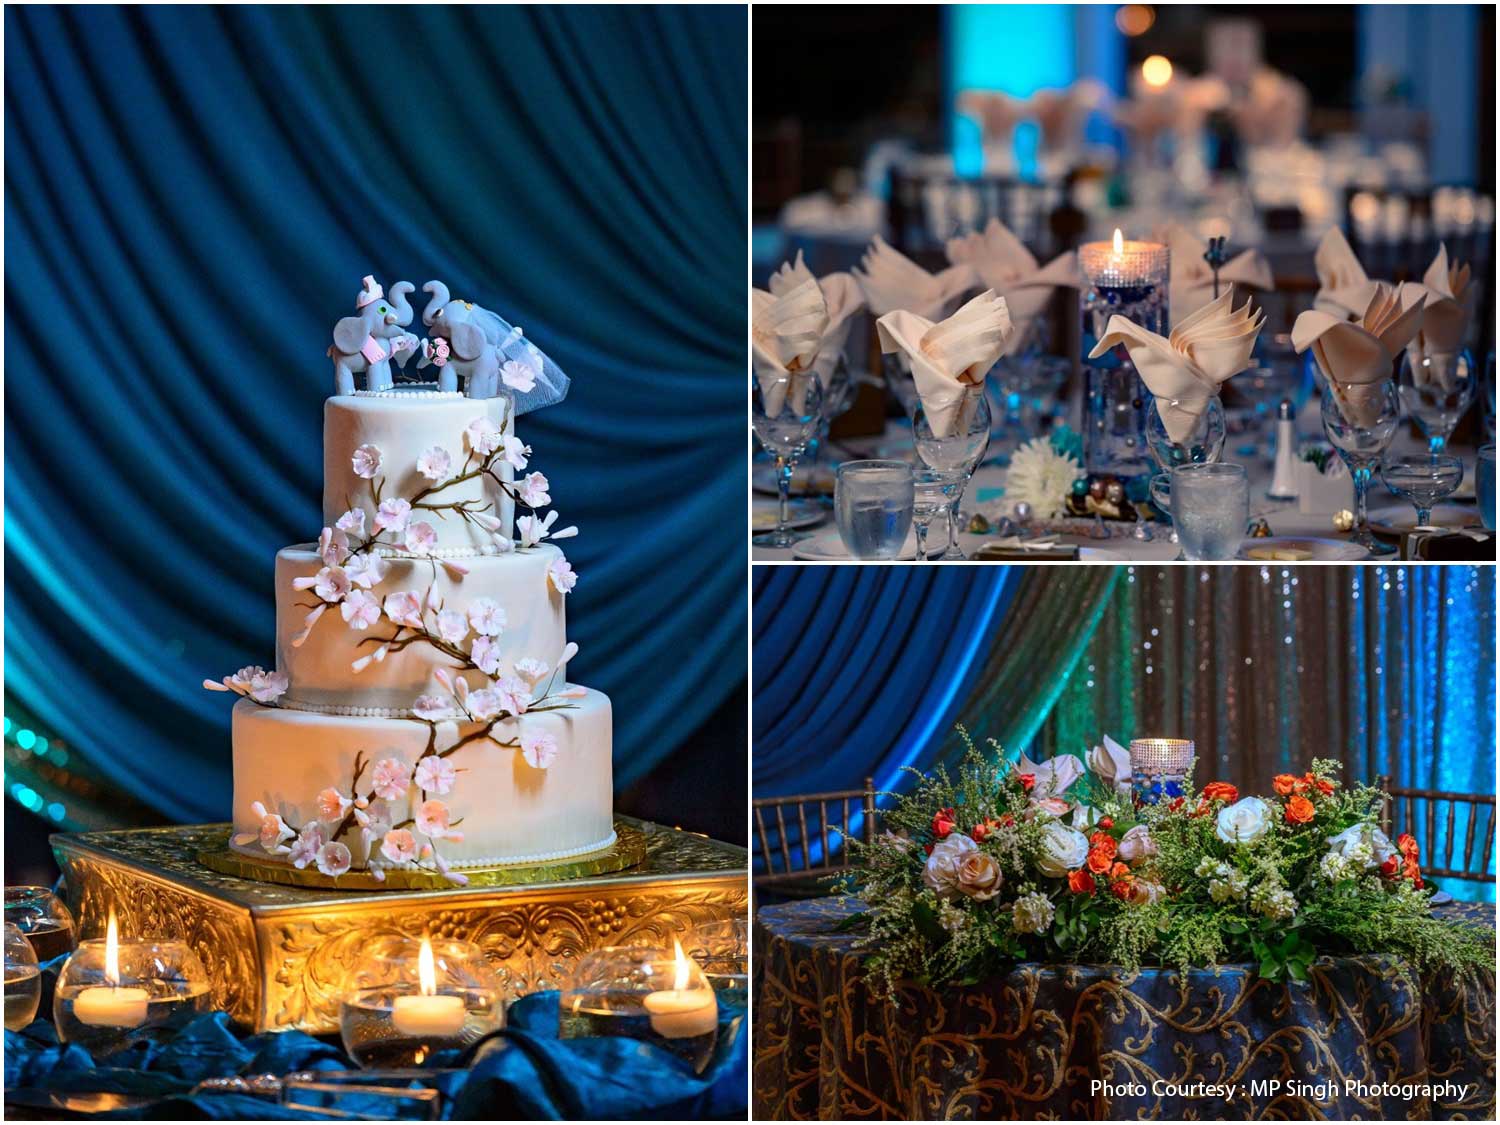 Quirky Elephant Details at the Reception